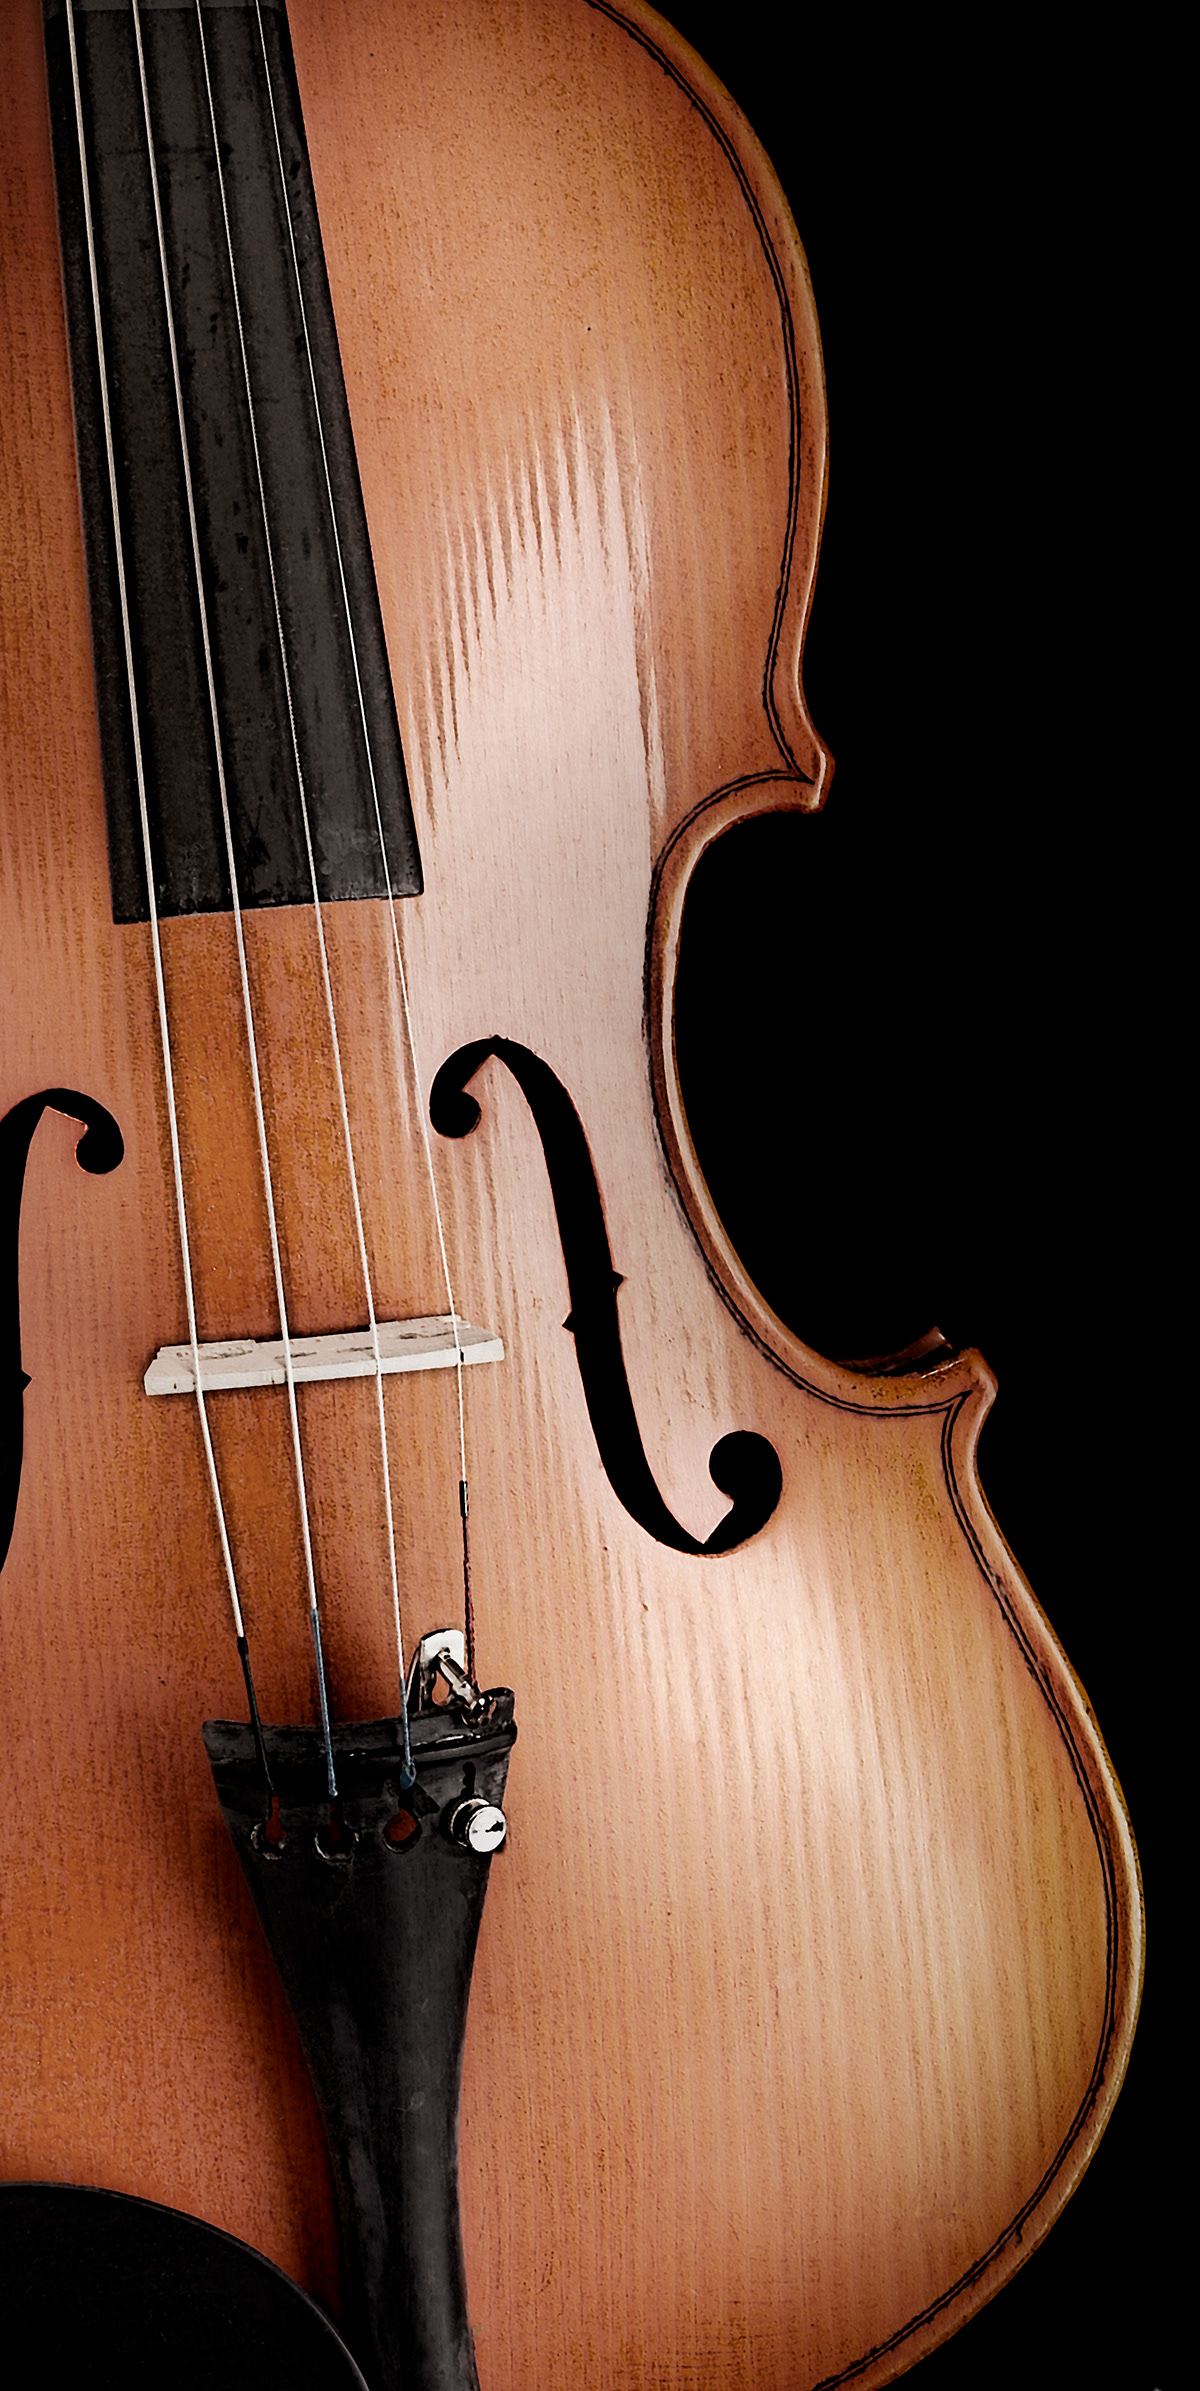 A graphic closeup photographic image of a old but still playable high school violin